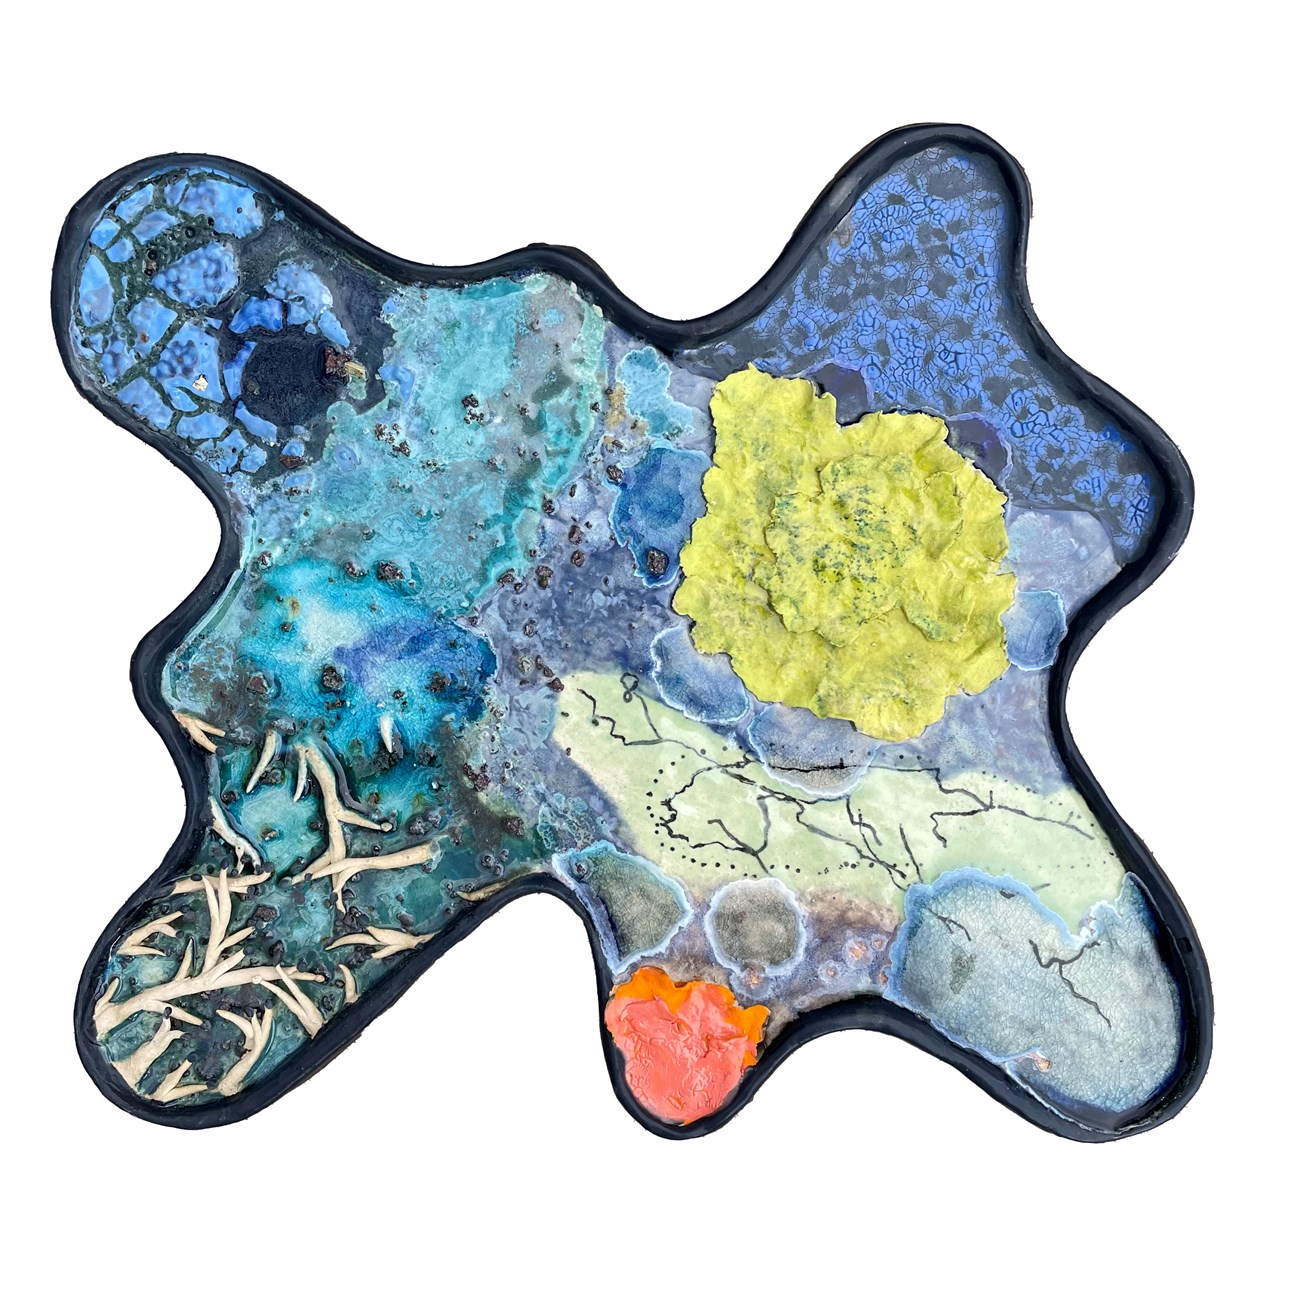 ceramic piece that has elements of the land features of Isle Royale, especially trees and water